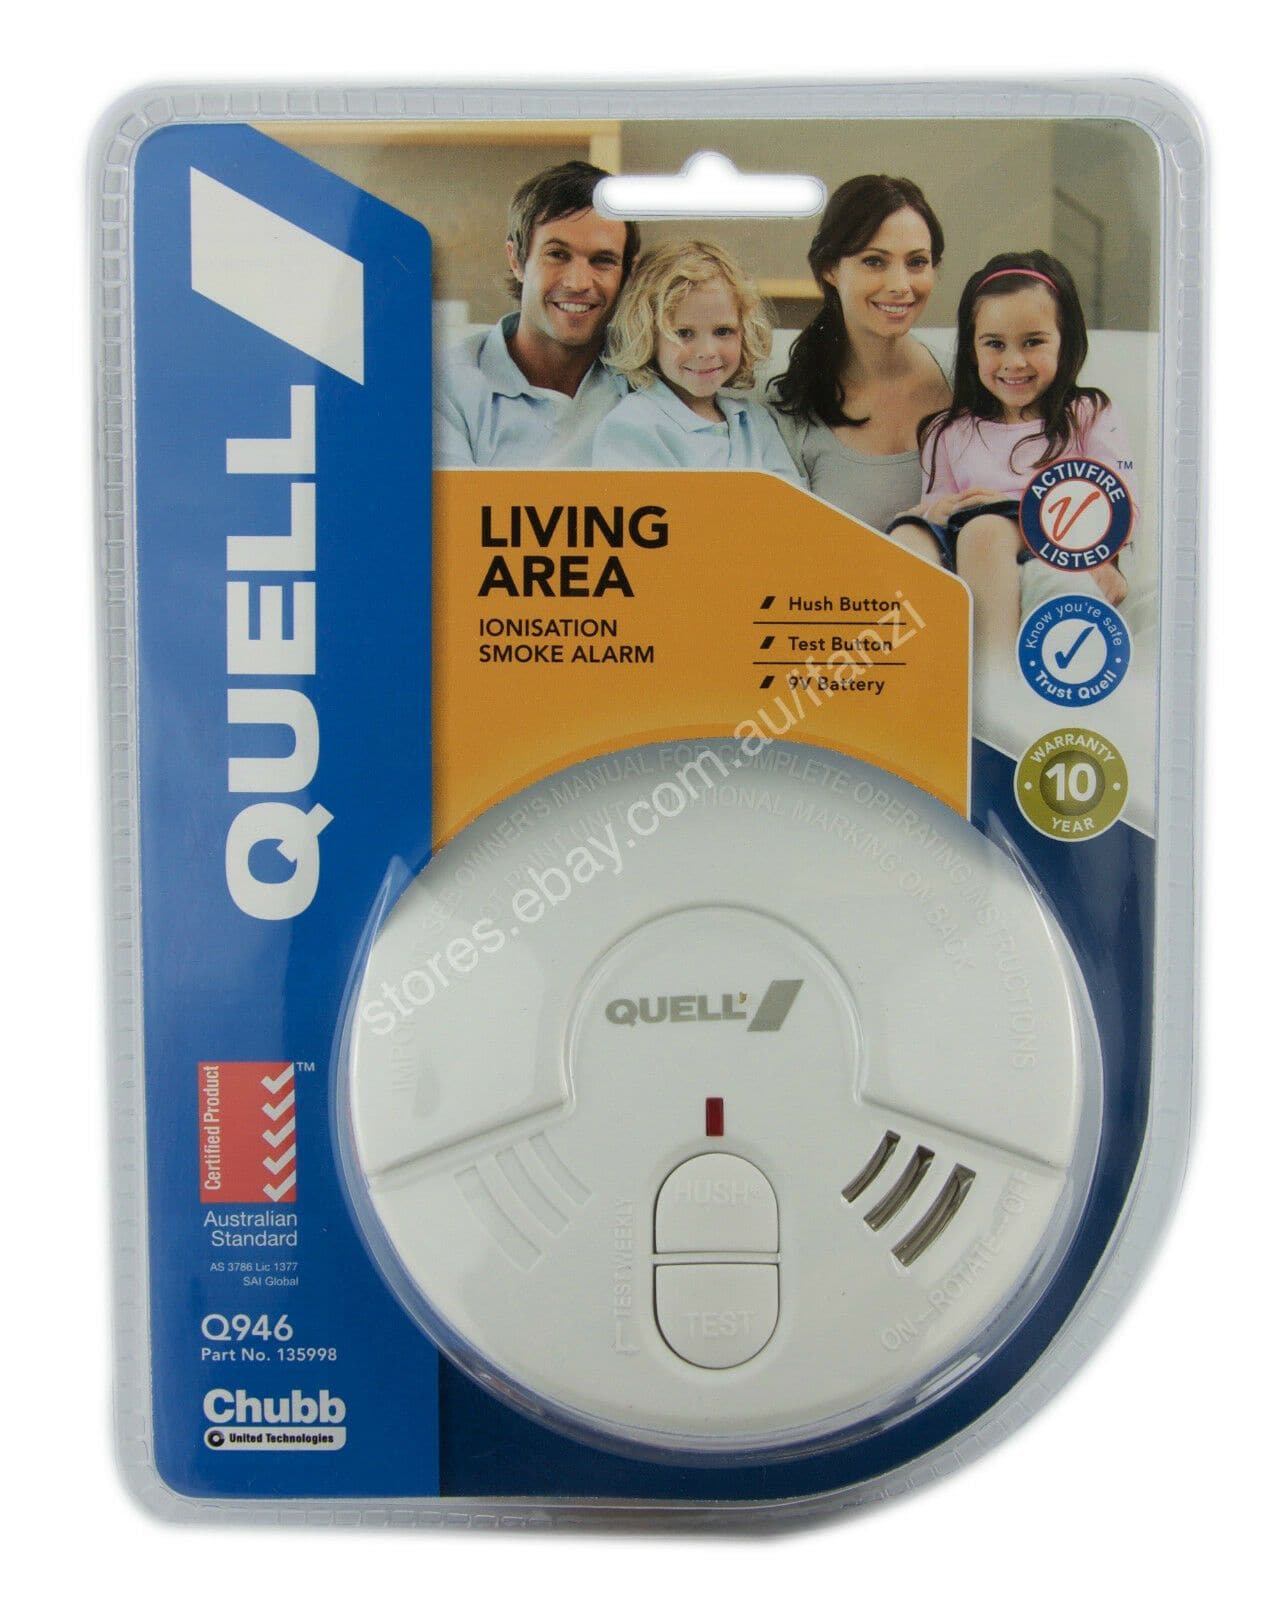 Quell Living Area Ionisation Smoke Alarm Hush Button, Test Button 9V 135998 - Double Bay Hardware